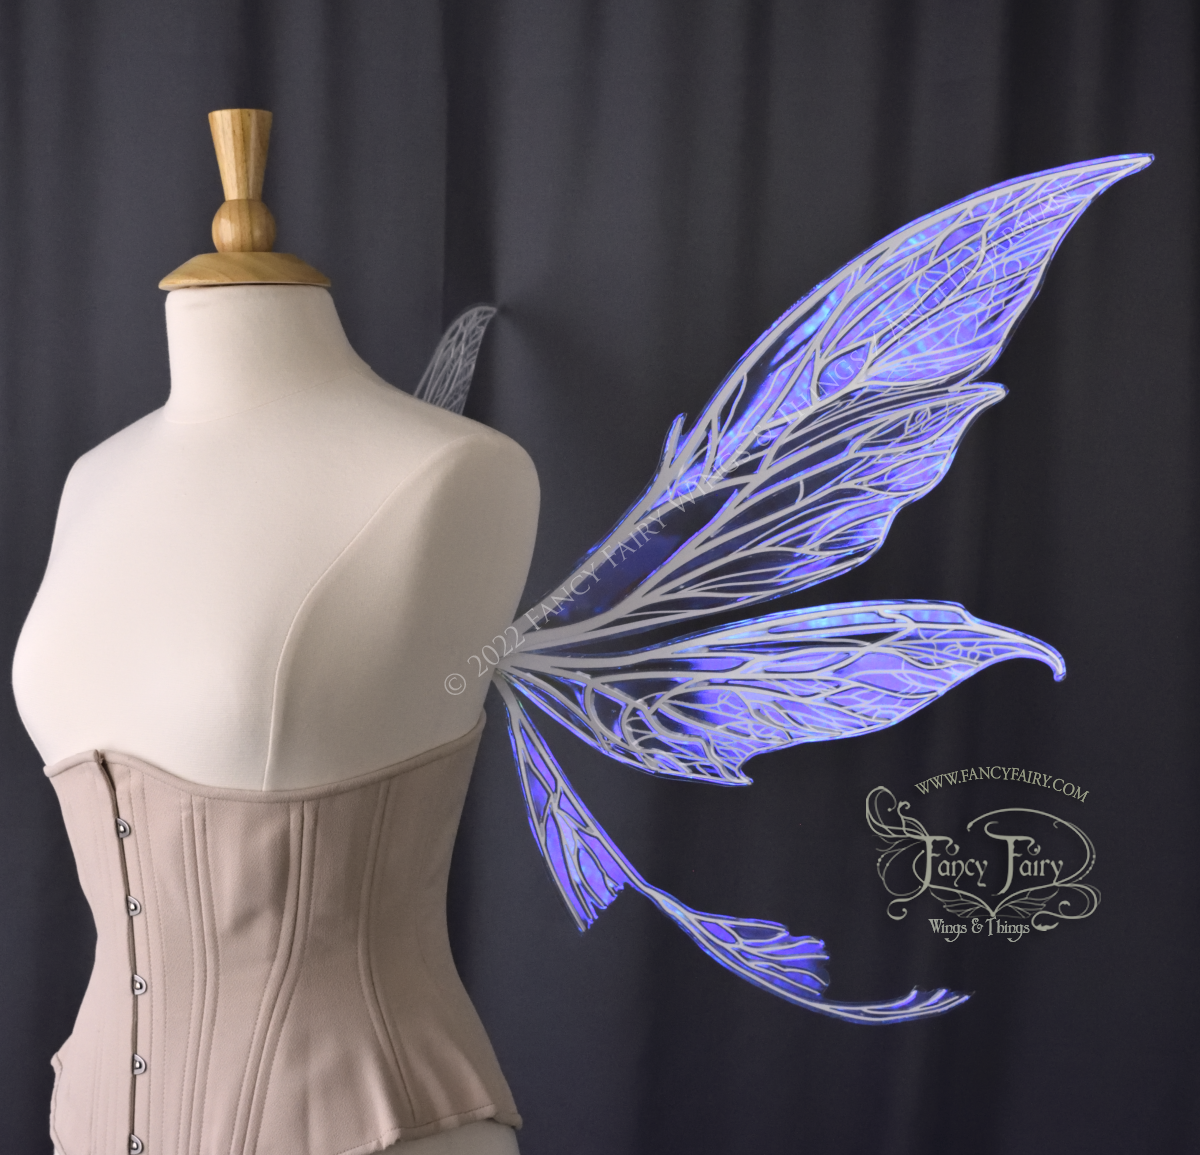 Colette Convertible Iridescent "Pix" Fairy Wings in Ultraviolet with white veins